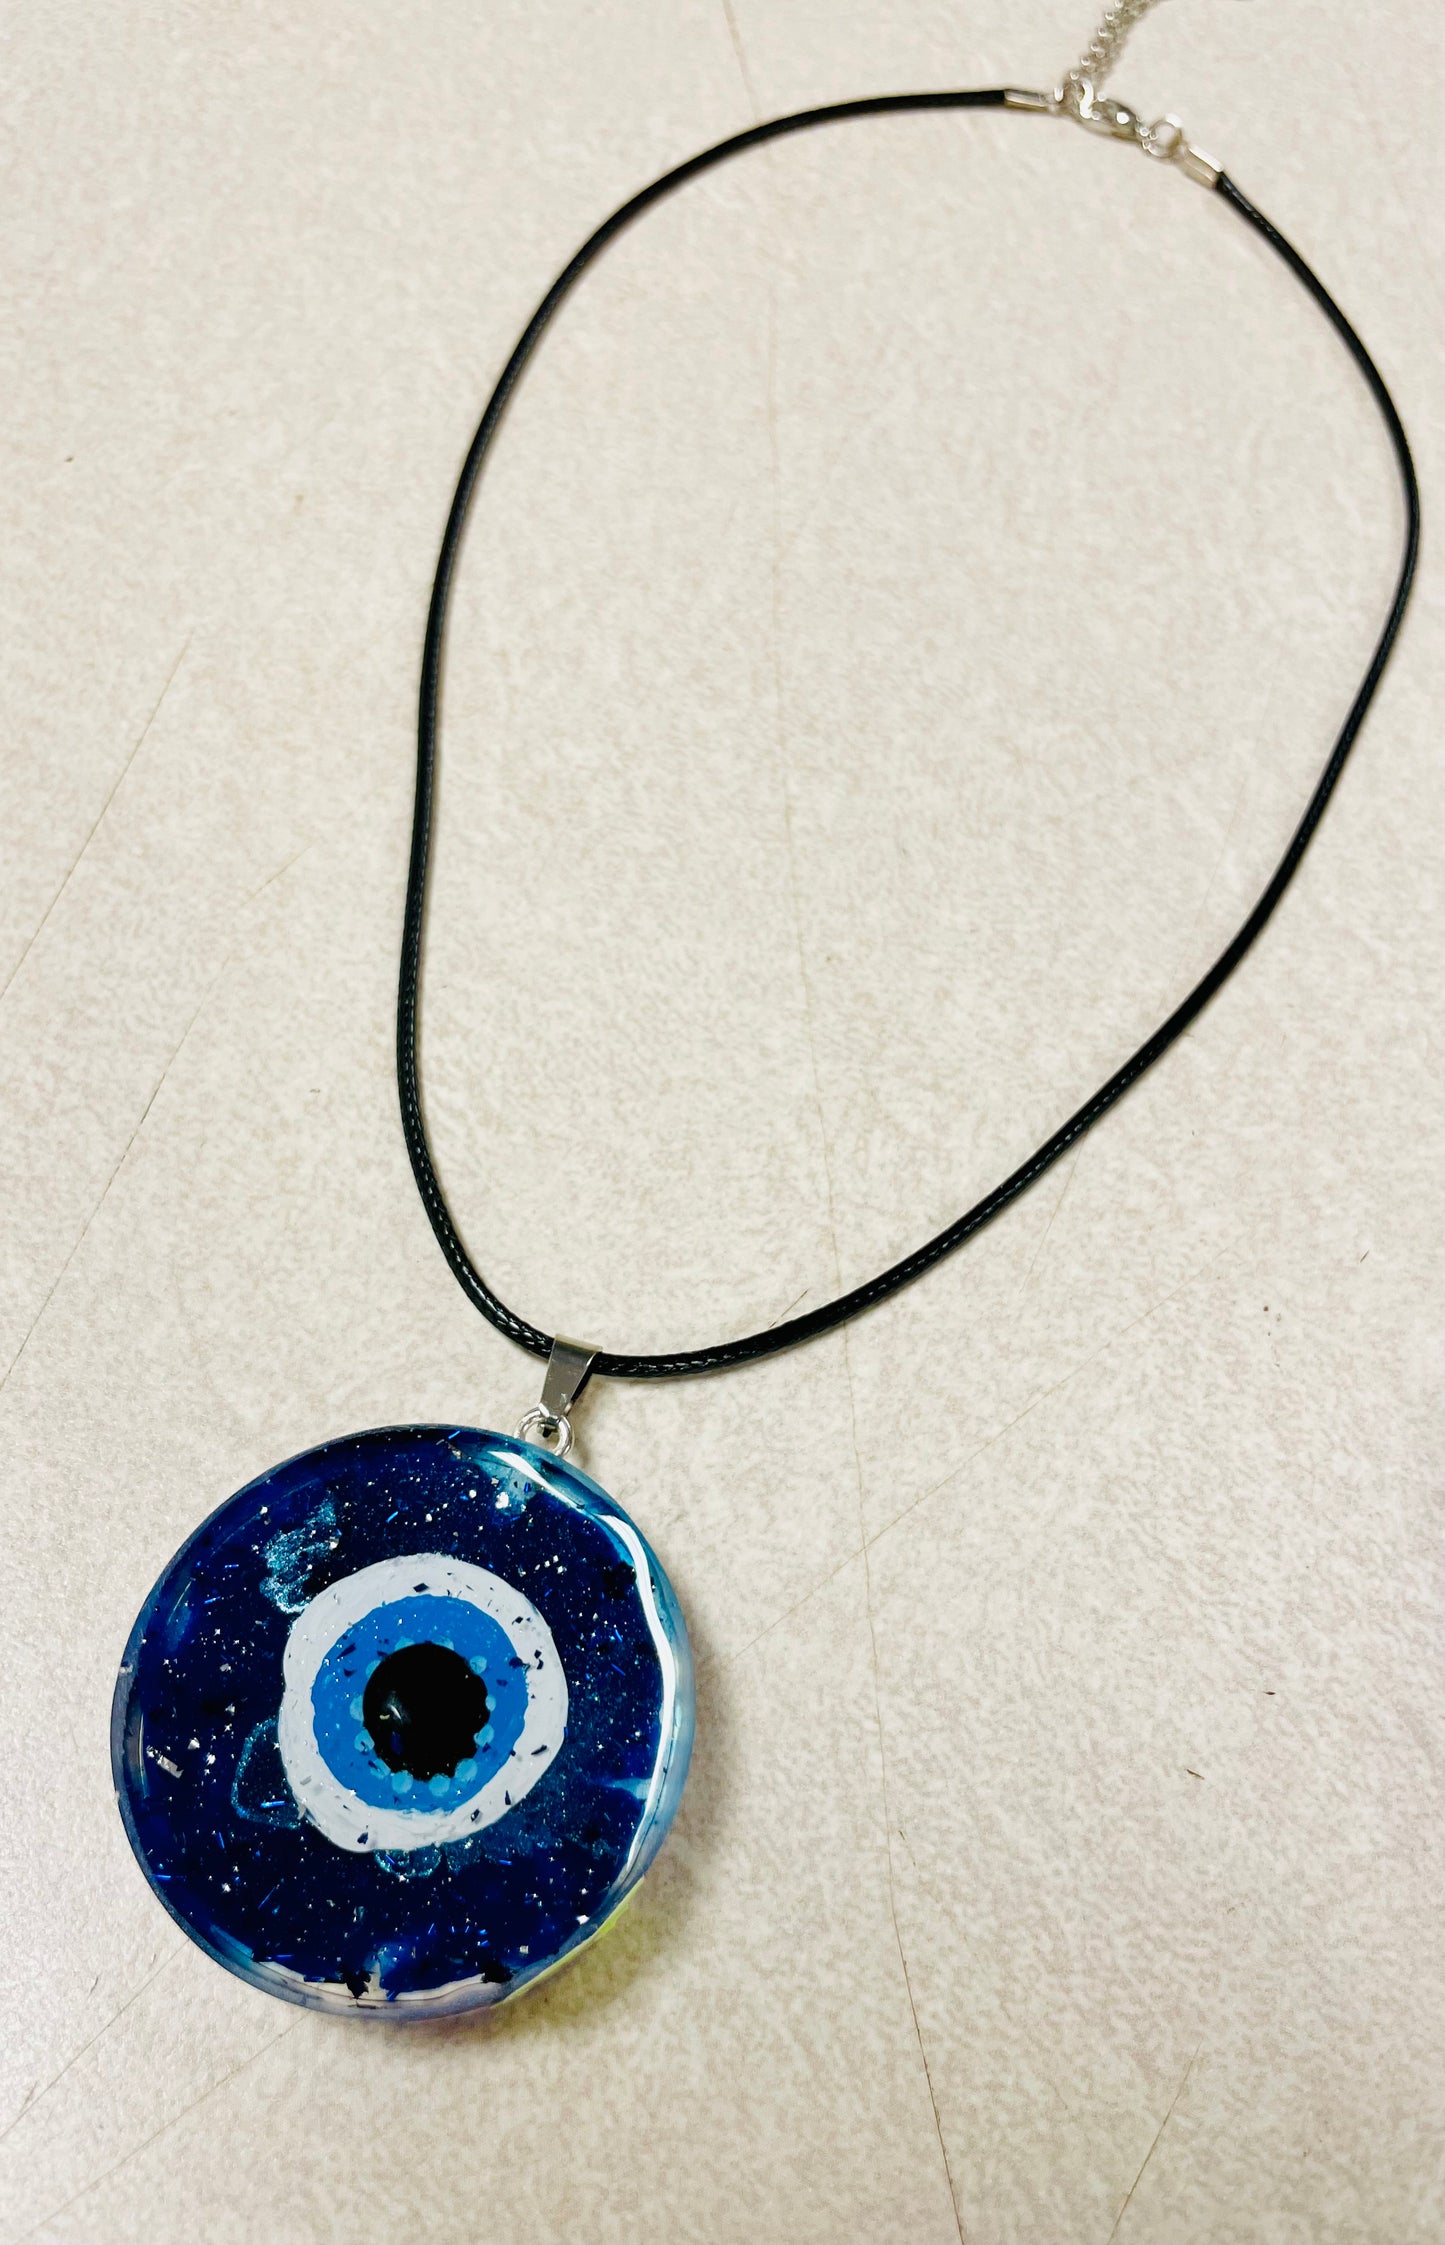 Evil Eye Protection Necklace, Black Wax Cord, Blue Glitter